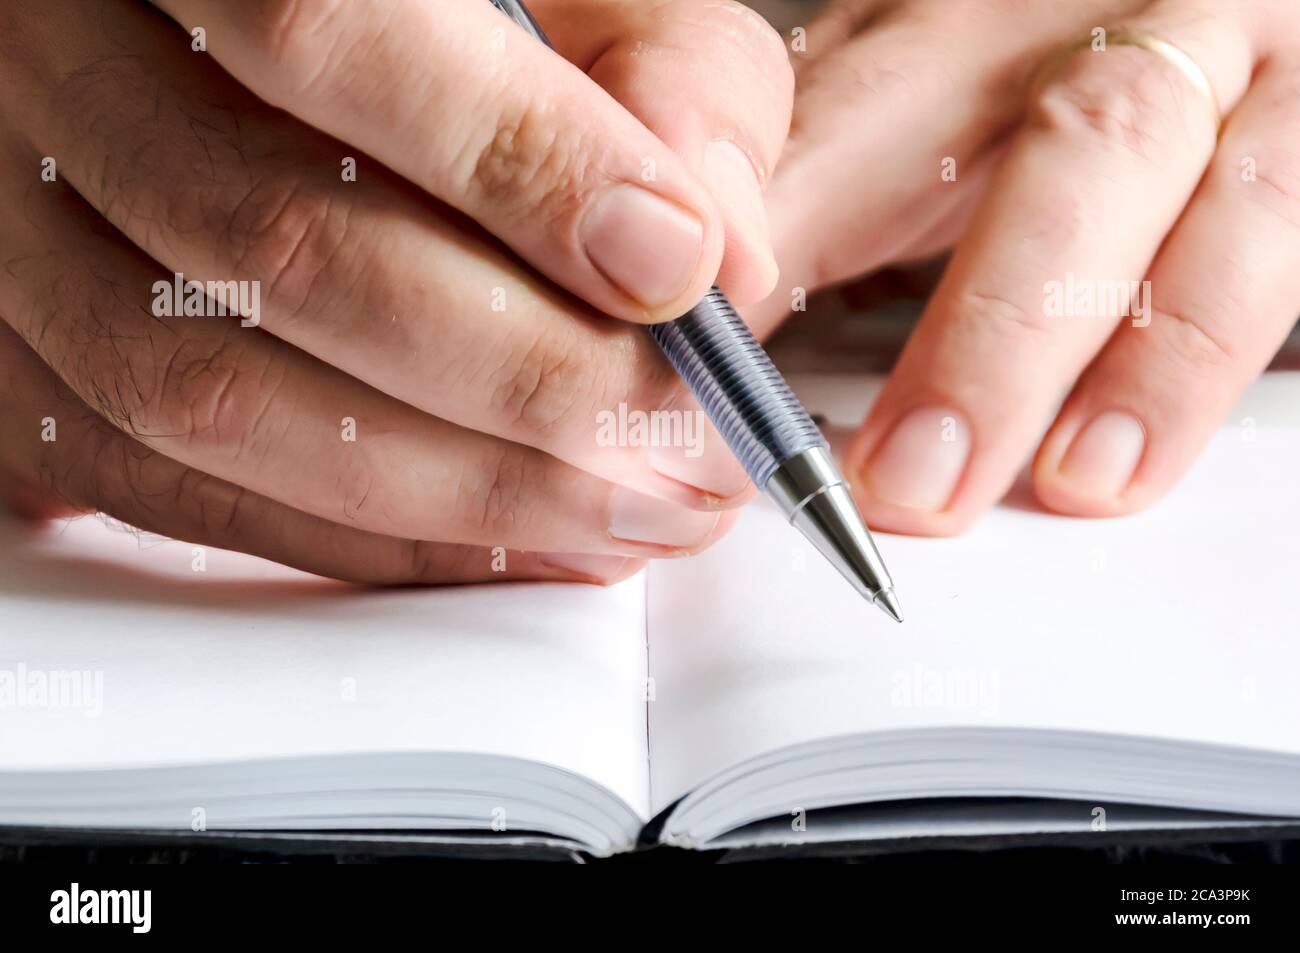 The right hand of a man writing with a pen on a notebook with blank pages. Journalistic or creative activity. White pages. Stock Photo